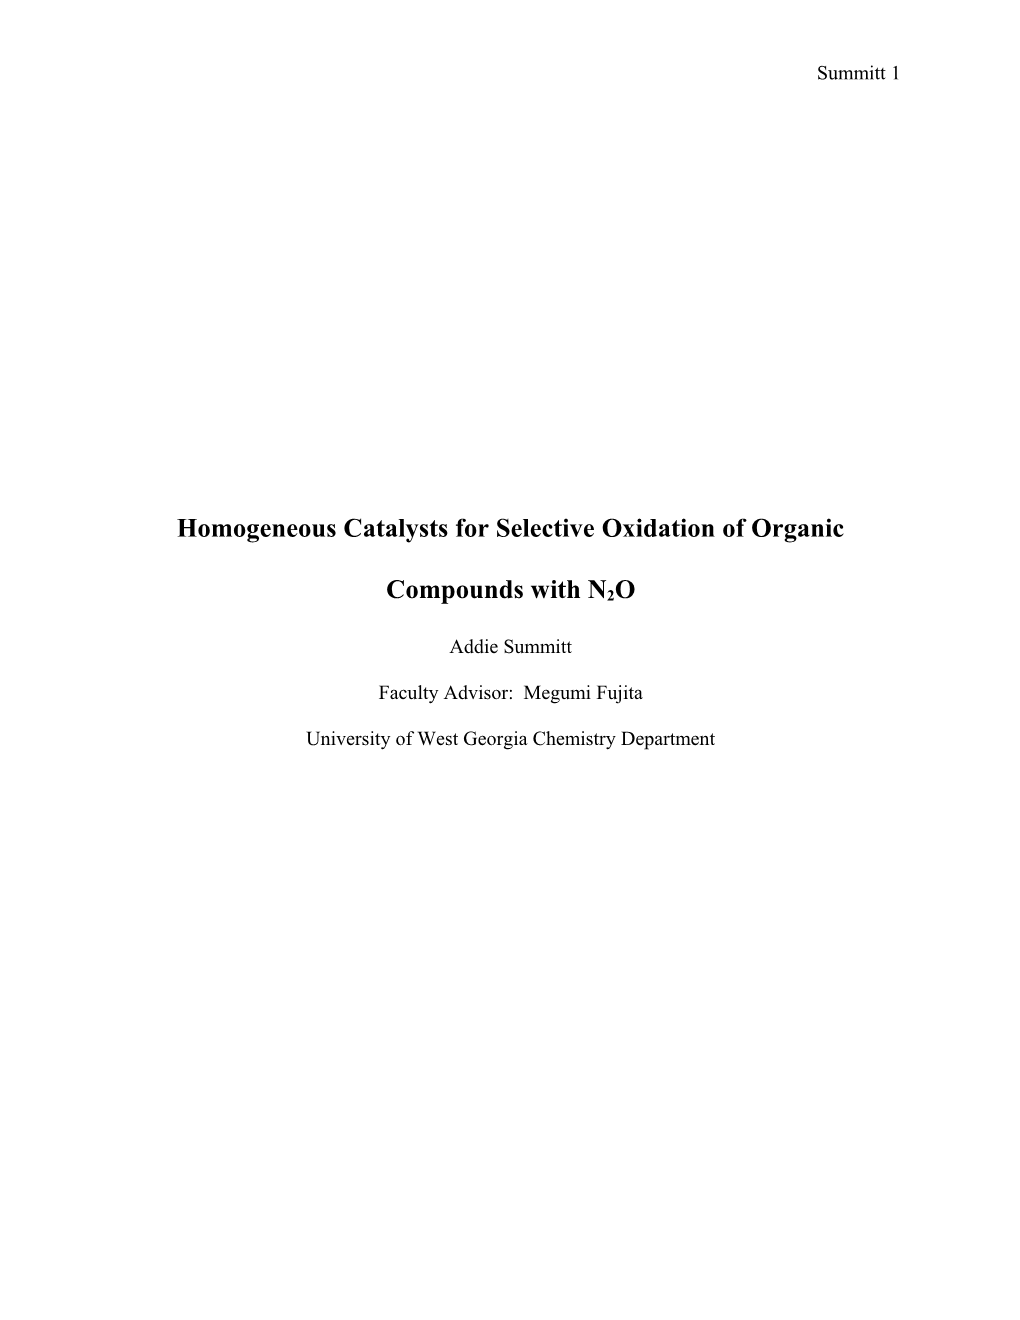 Homogeneous Catalysts for Selective Oxidation of Organic Compounds with N2O